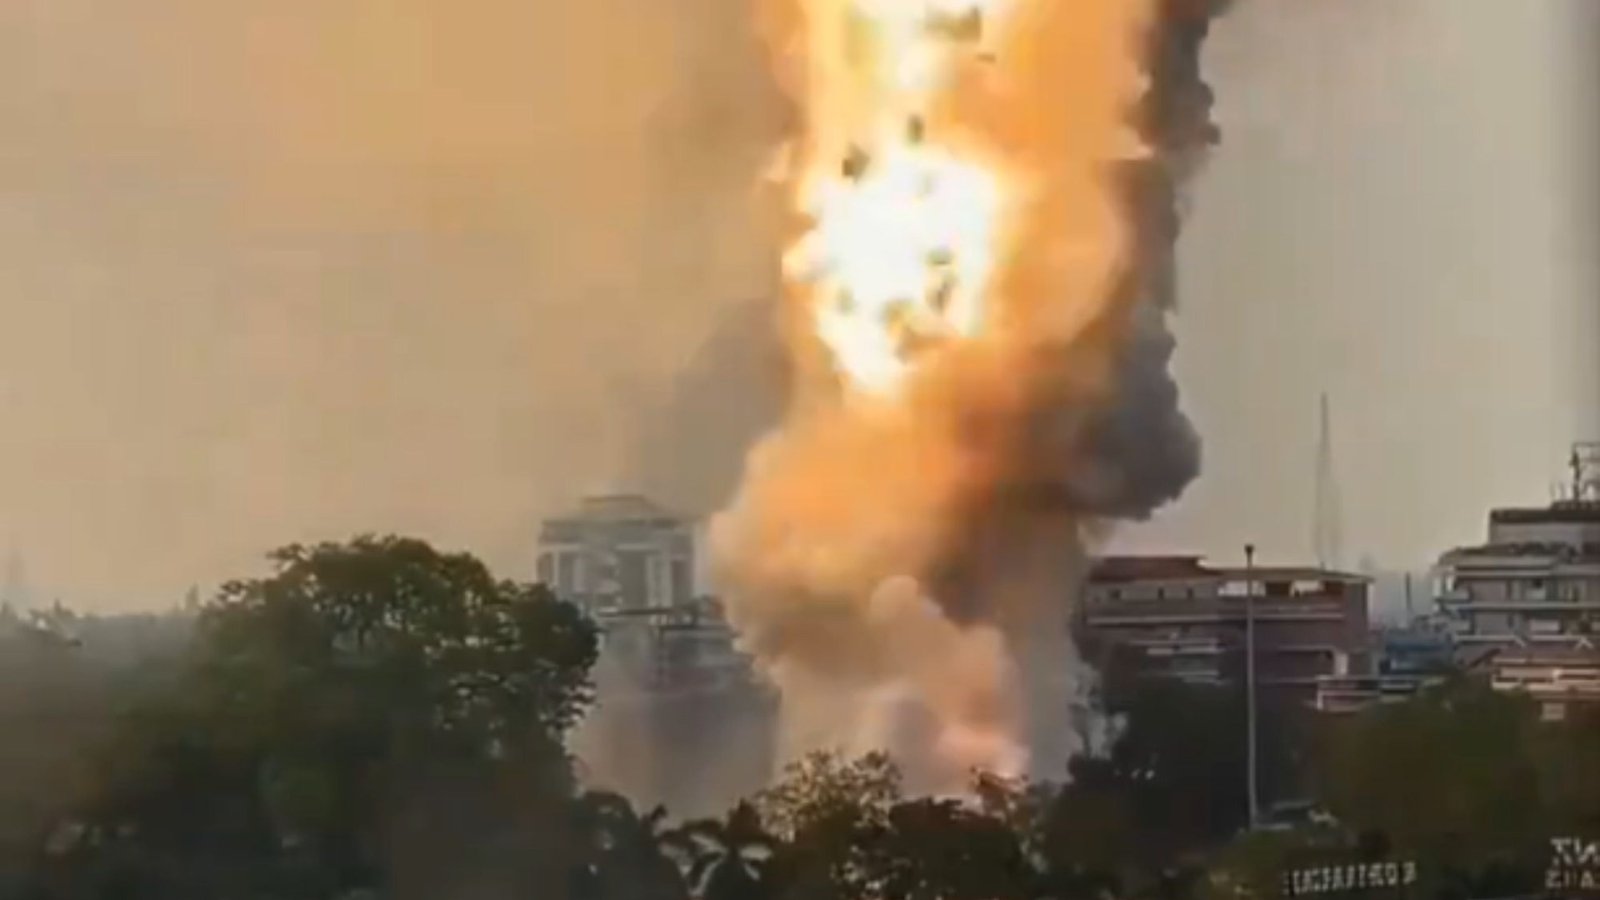 Dramatic moment fireworks warehouse bursts into flames sparking huge deadly explosions as one person is killed